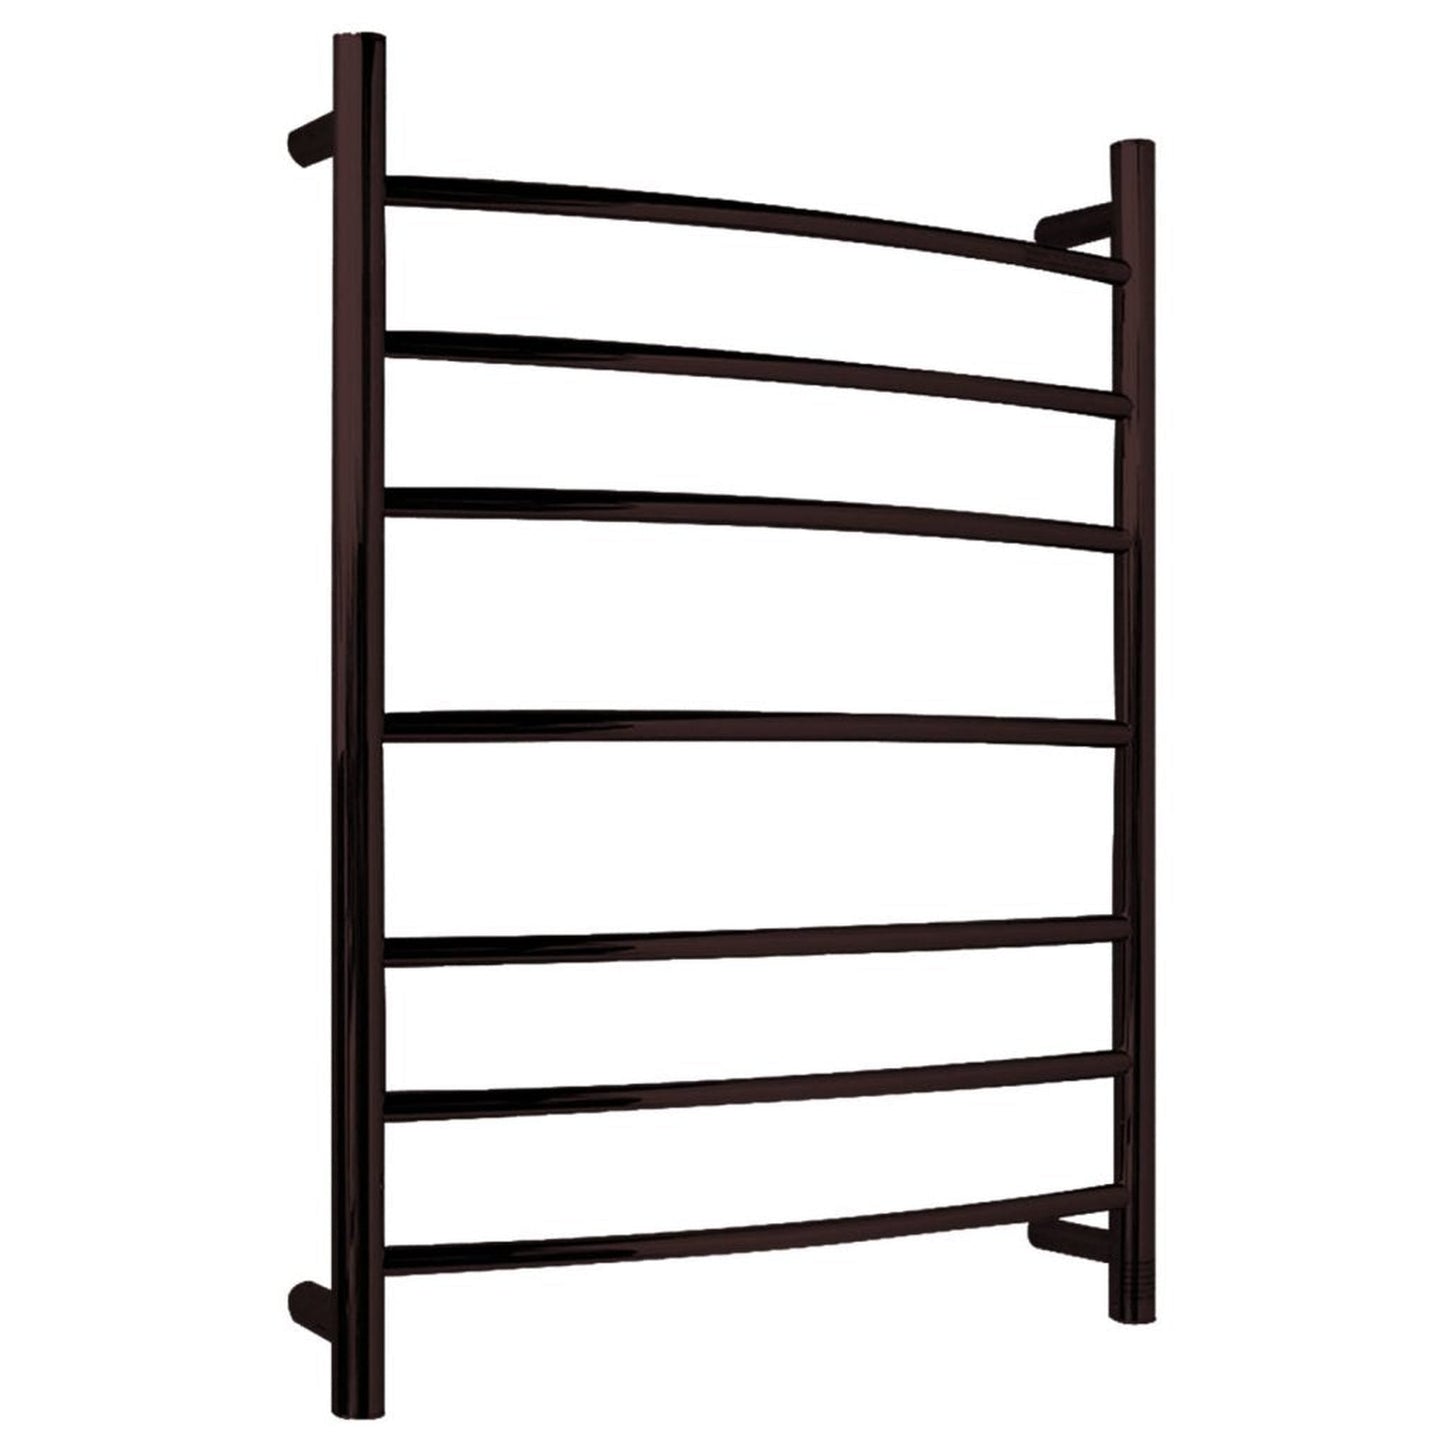 ANZZI Gown Series 7-Bar Stainless Steel Oil Rubbed Bronze Wall-Mounted Electric Towel Warmer Rack in